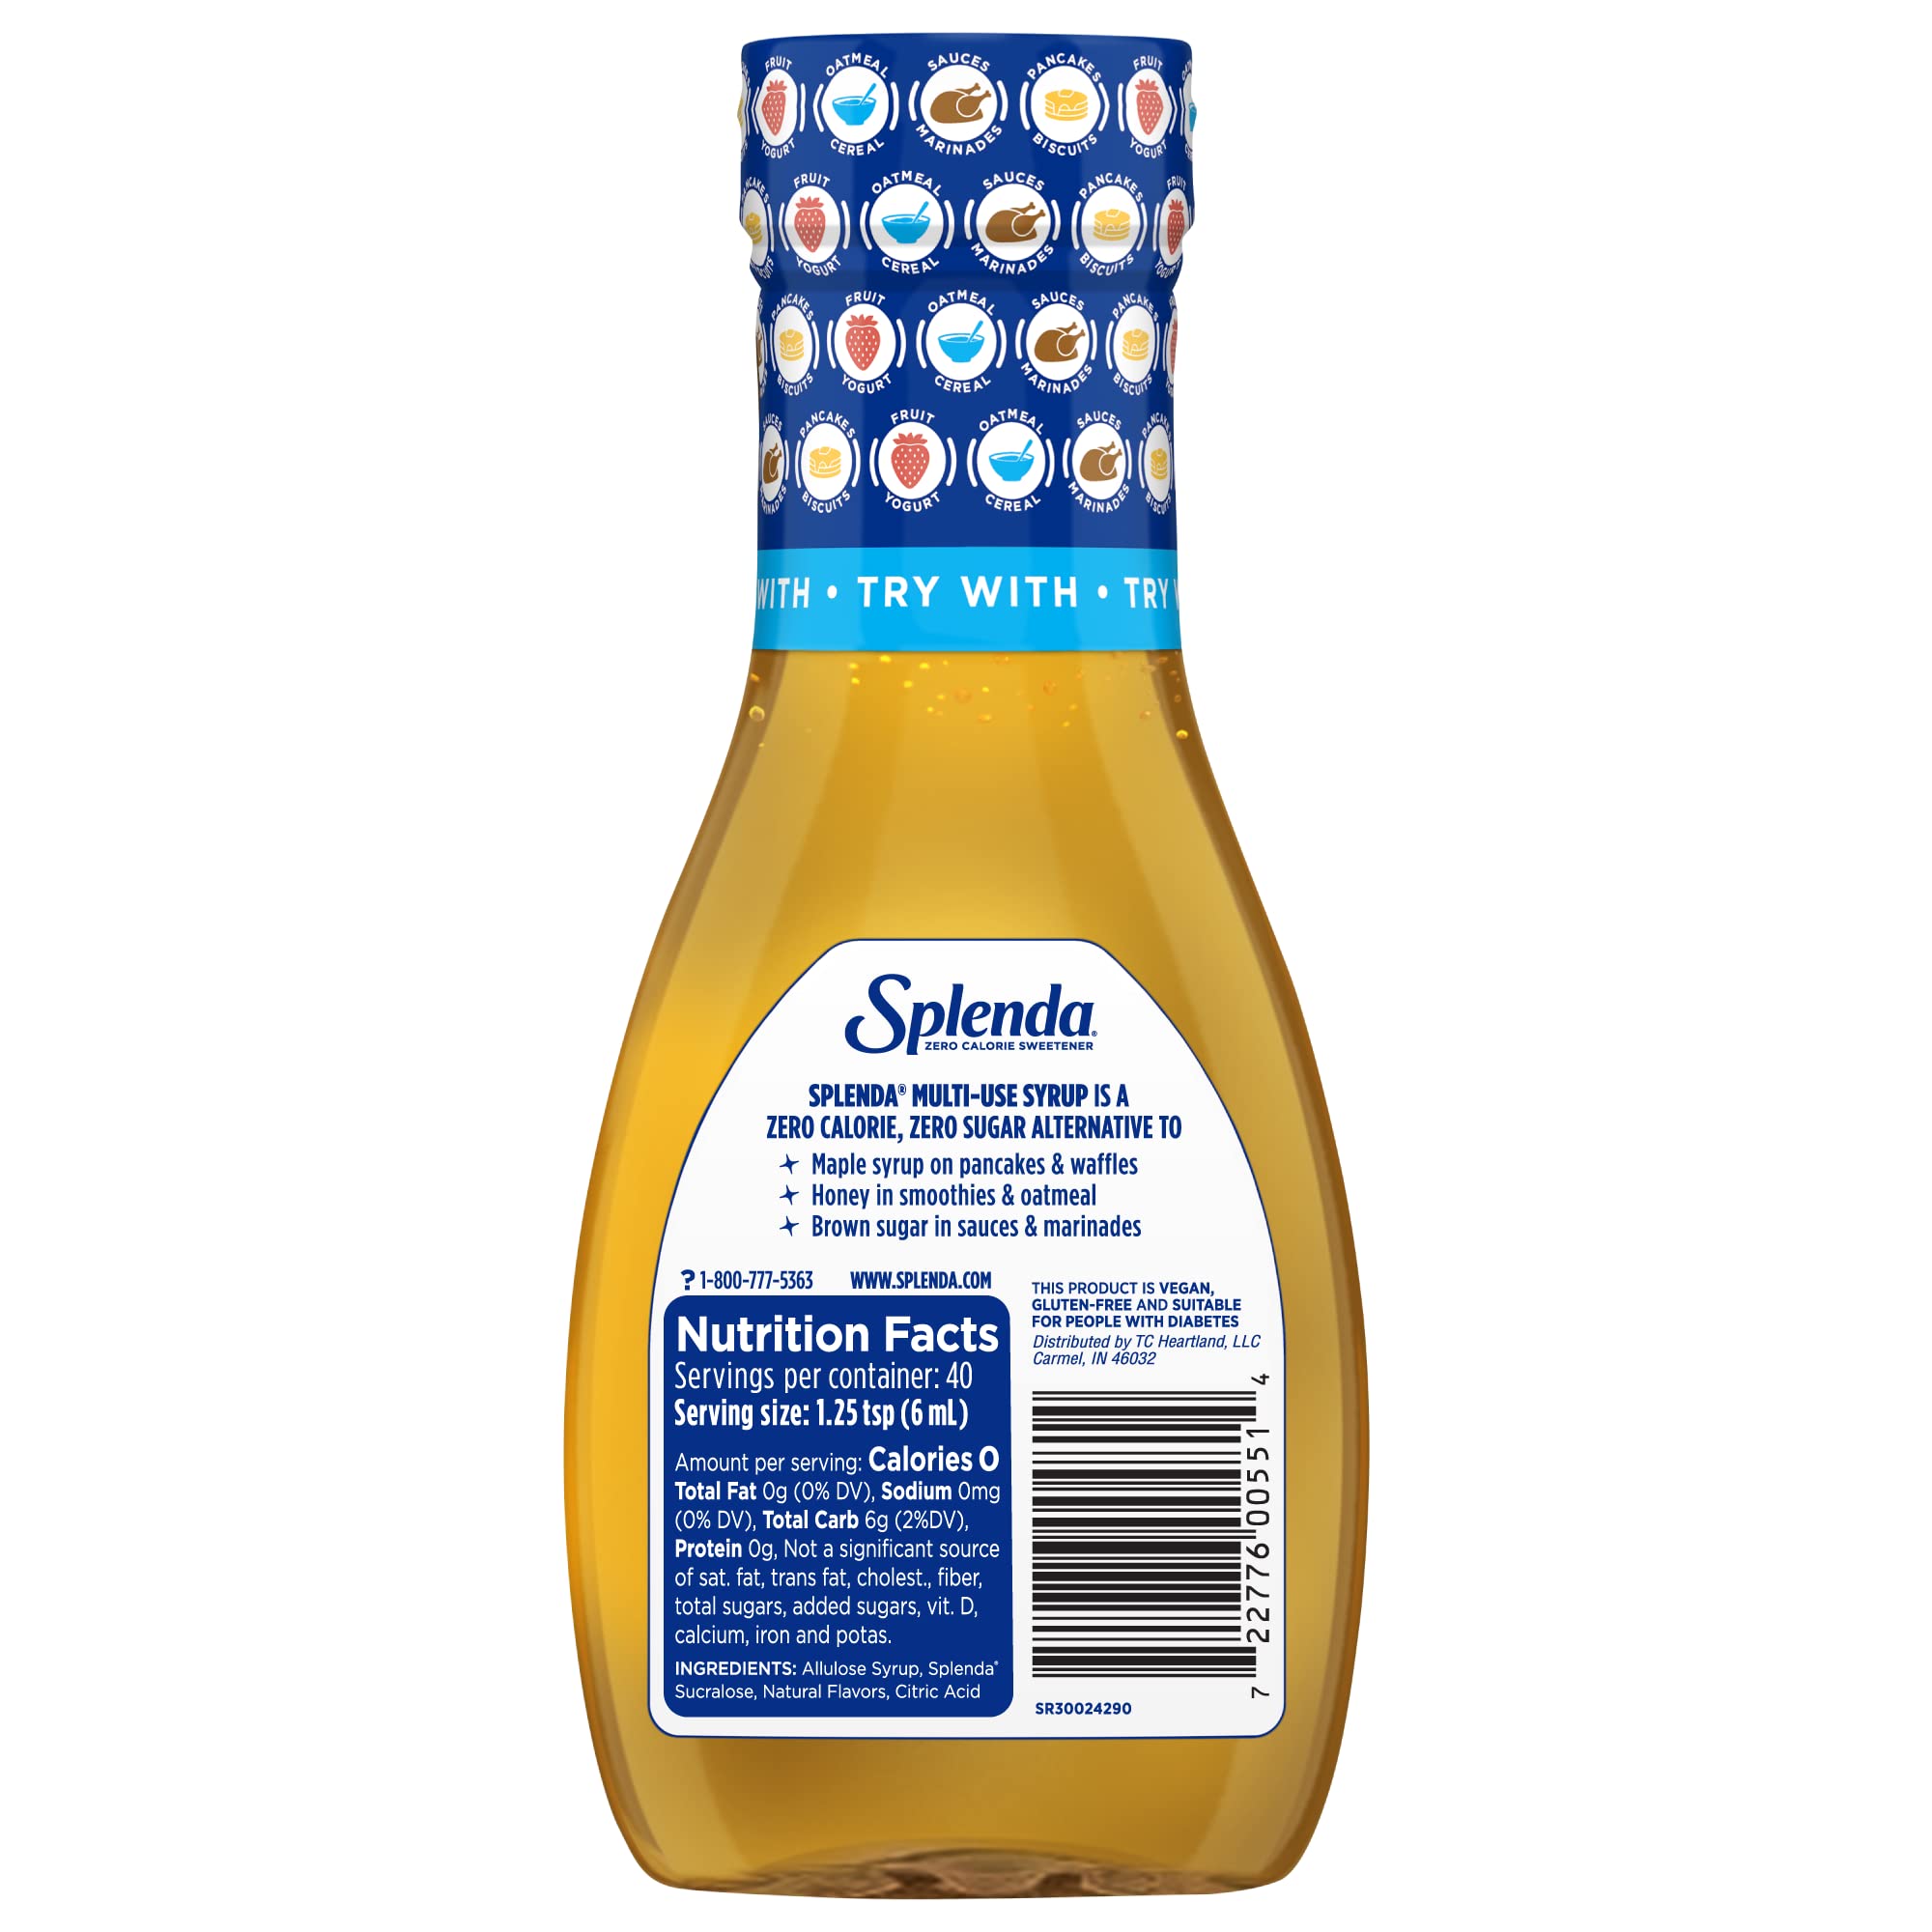 Splenda Multi-Use Syrup, Zero Calorie, Sugar Free Substitute for Maple Syrup, Honey, Agave and Brown Sugar, Allulose Liquid Sweetener, 8oz Bottle